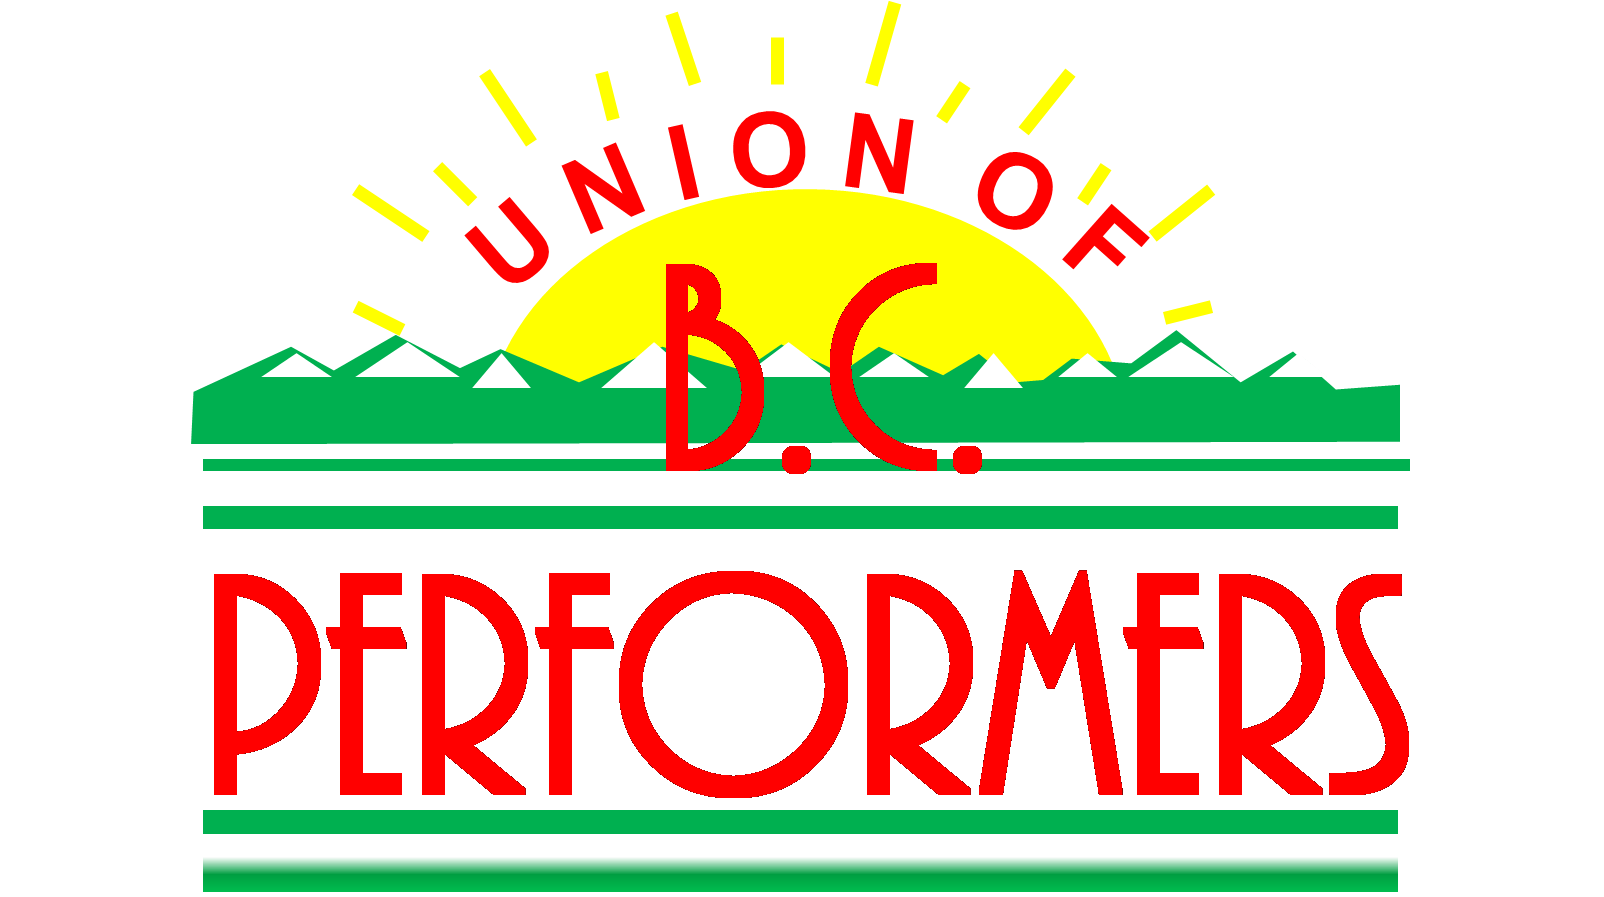 Red and Yellow Restaurant Logo - Image - UNION OF B.C. PERFORMERS IN RED, YELLOW, and GREEN LOGO.png ...